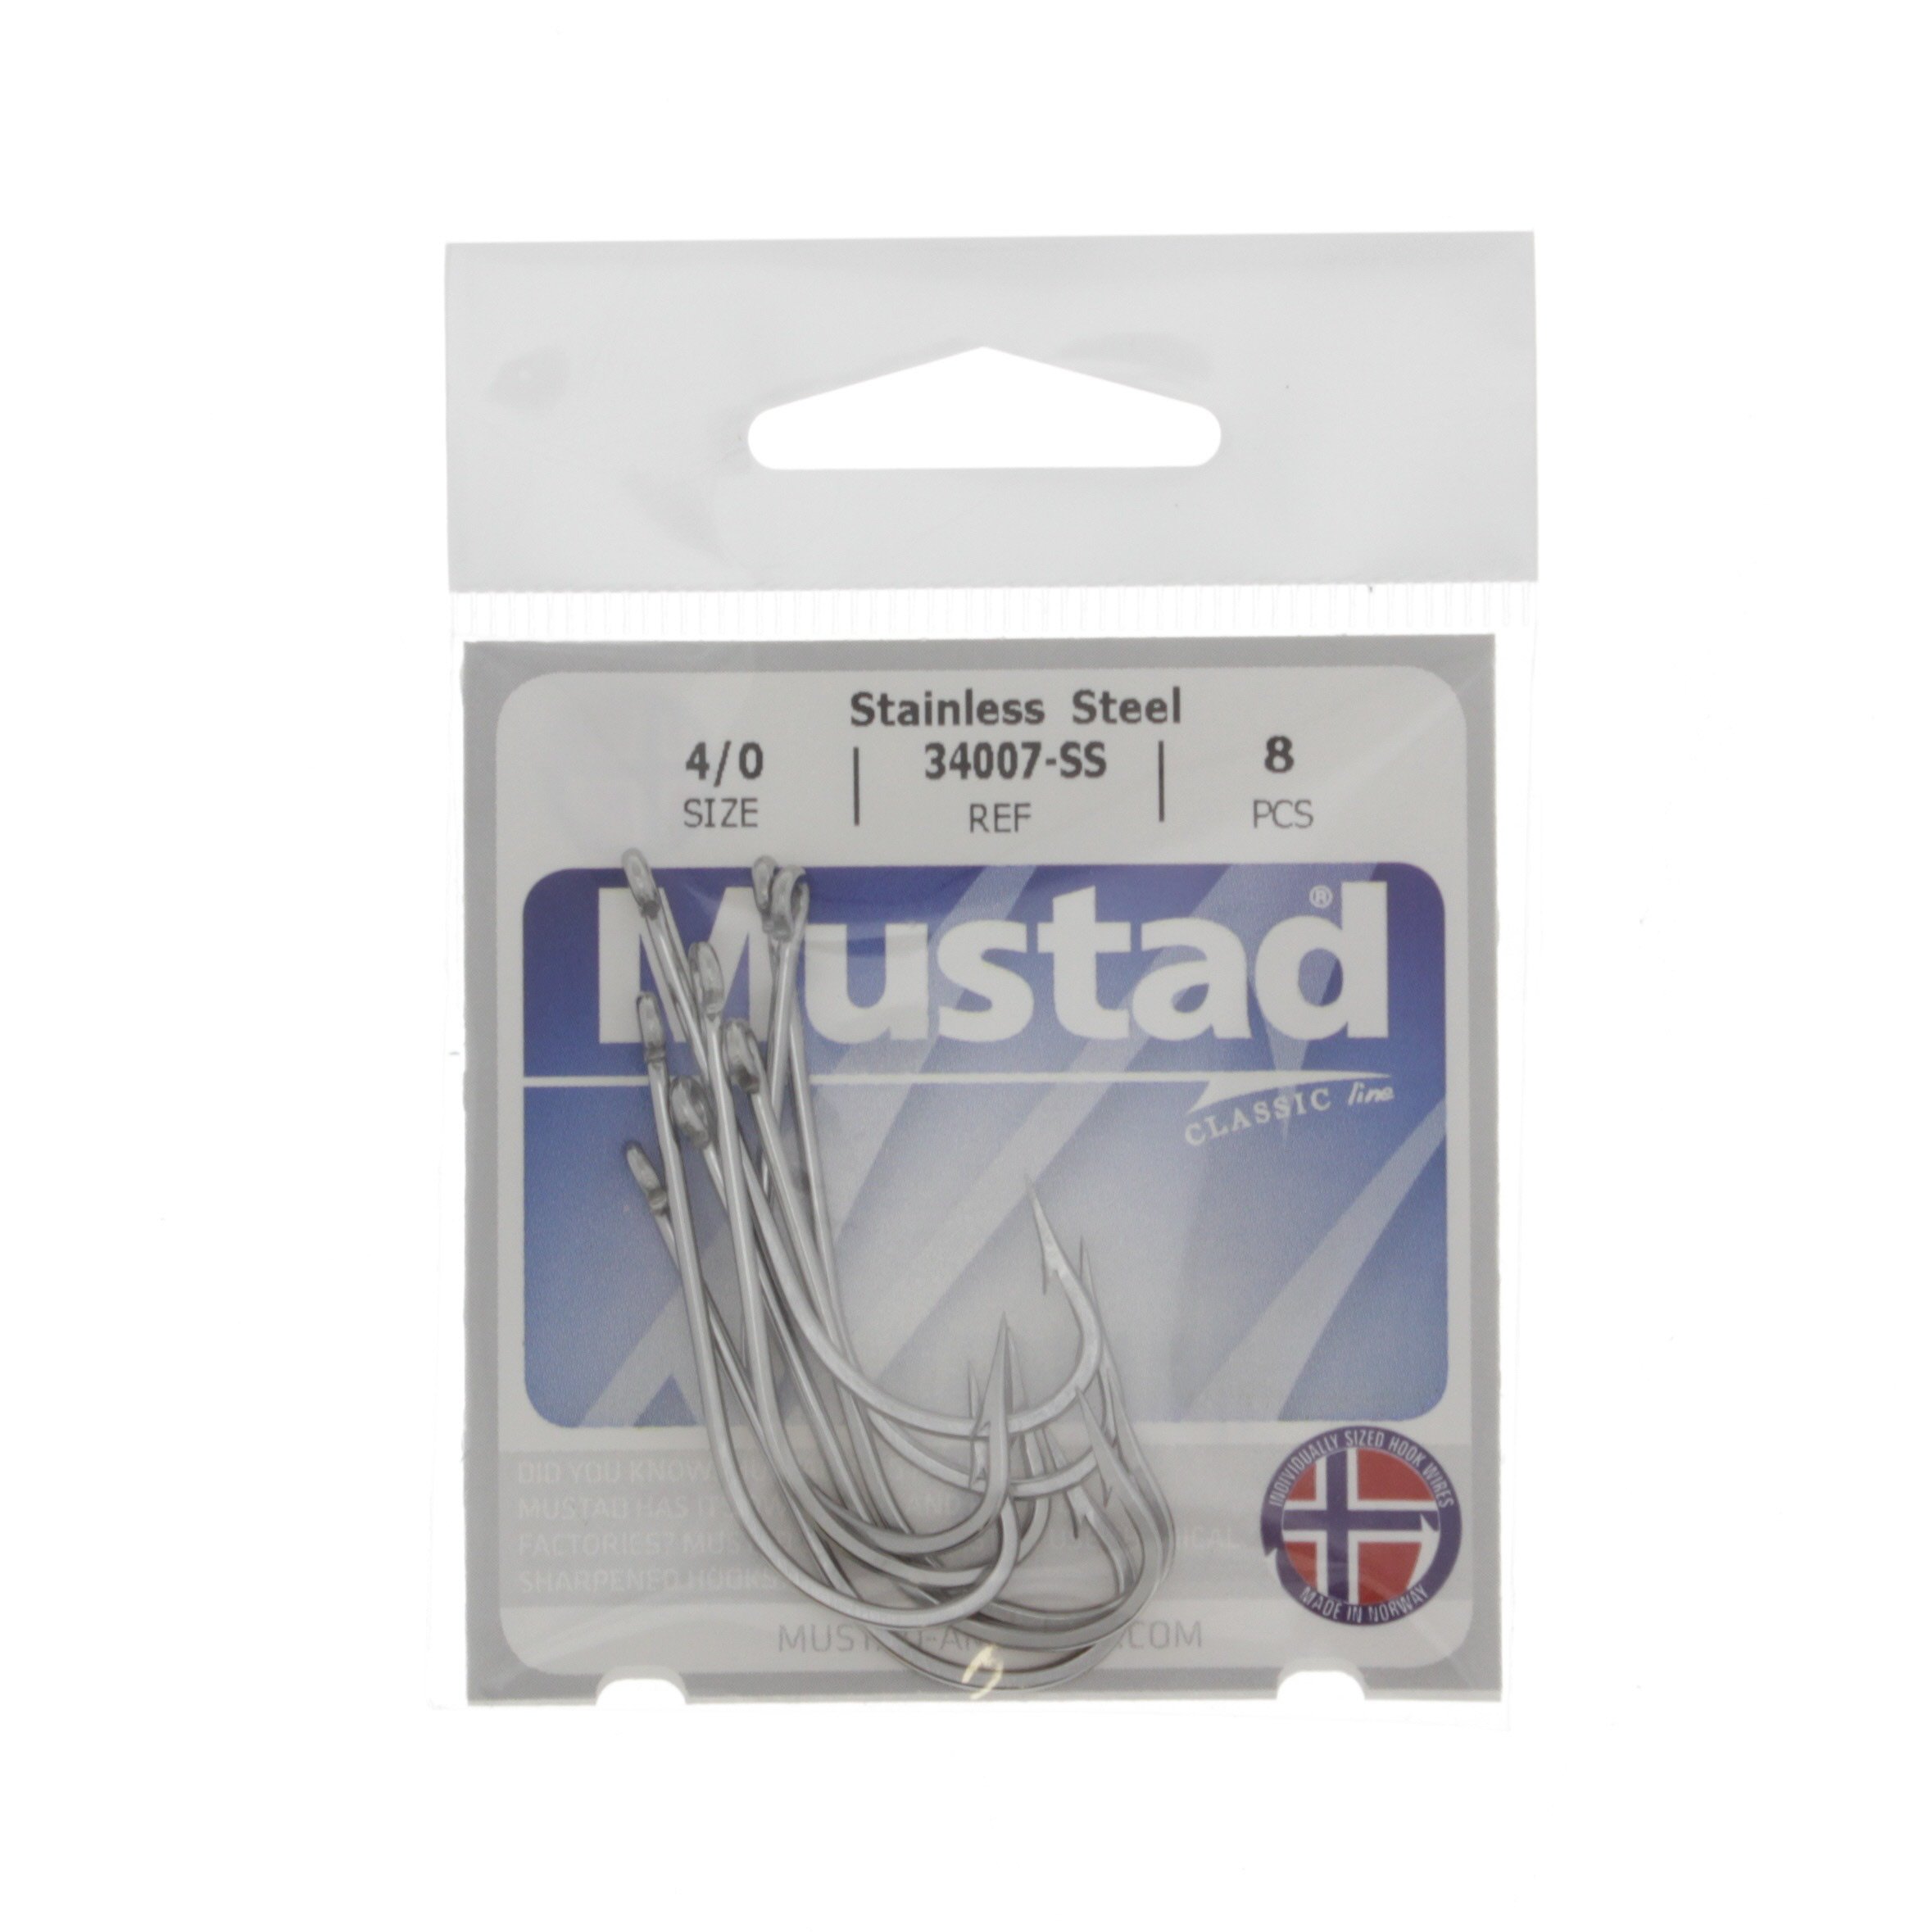 Mustad Stainless Steel Hooks Size 4/0 - Shop Fishing at H-E-B